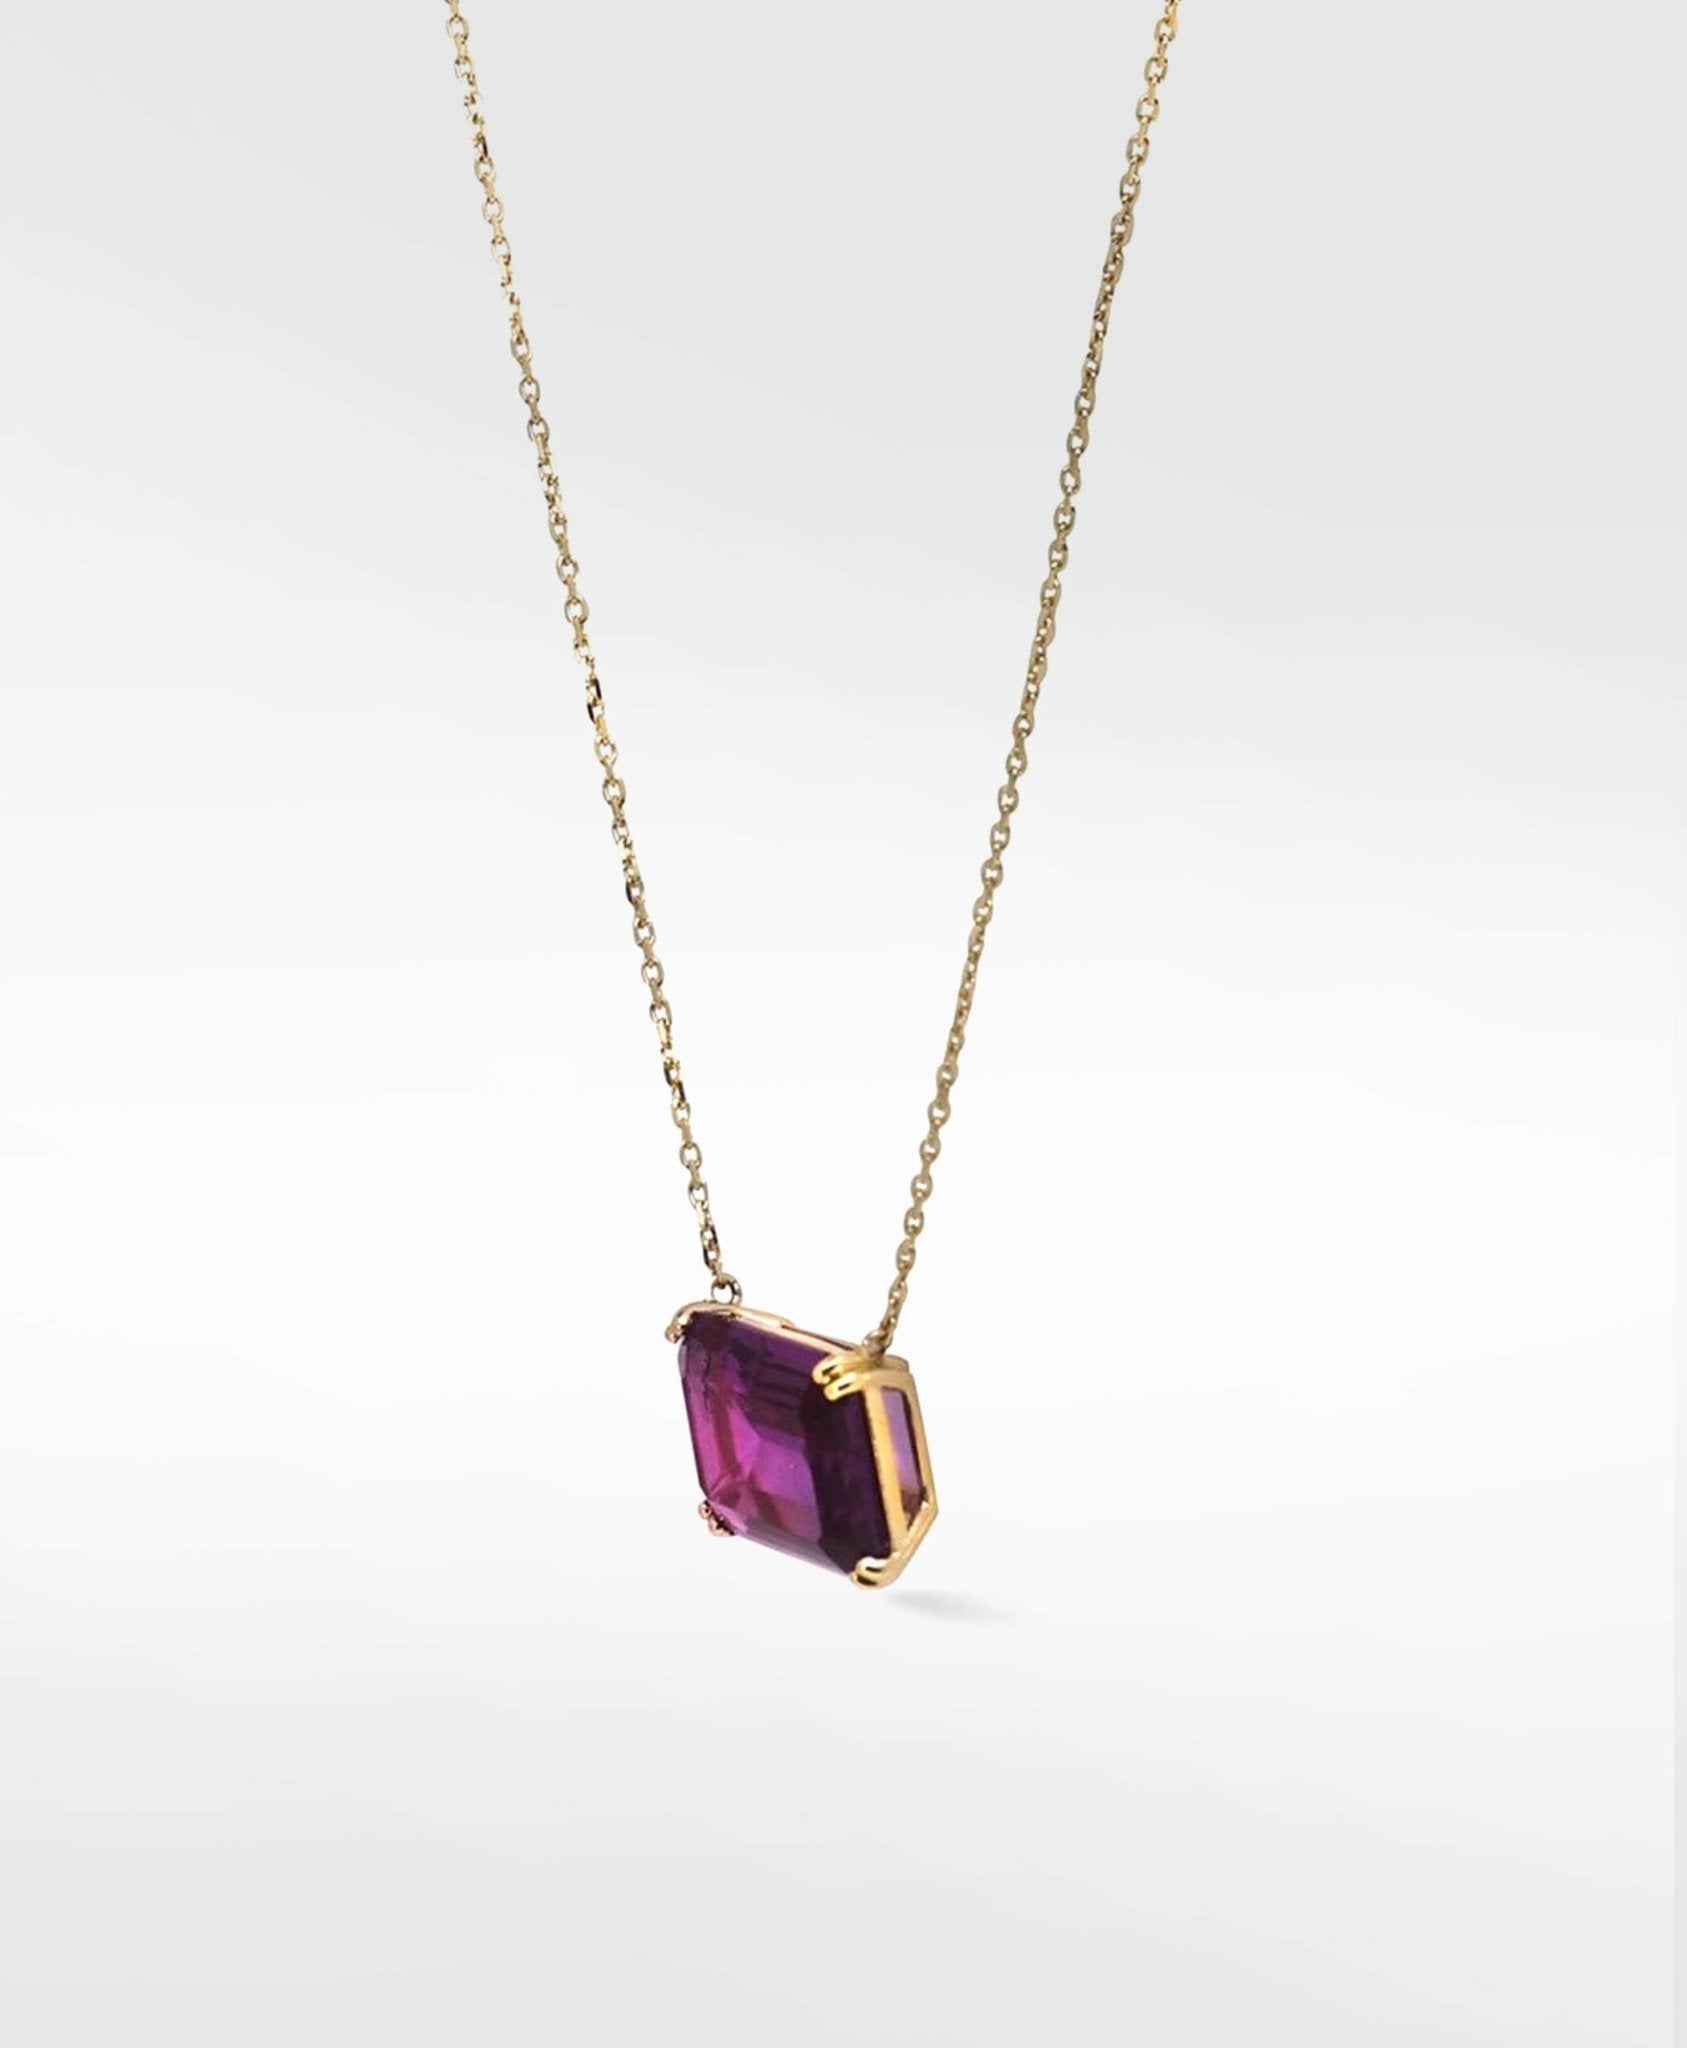 Alicia Violet Sapphire Necklace in 14K Gold - Lark and Berry